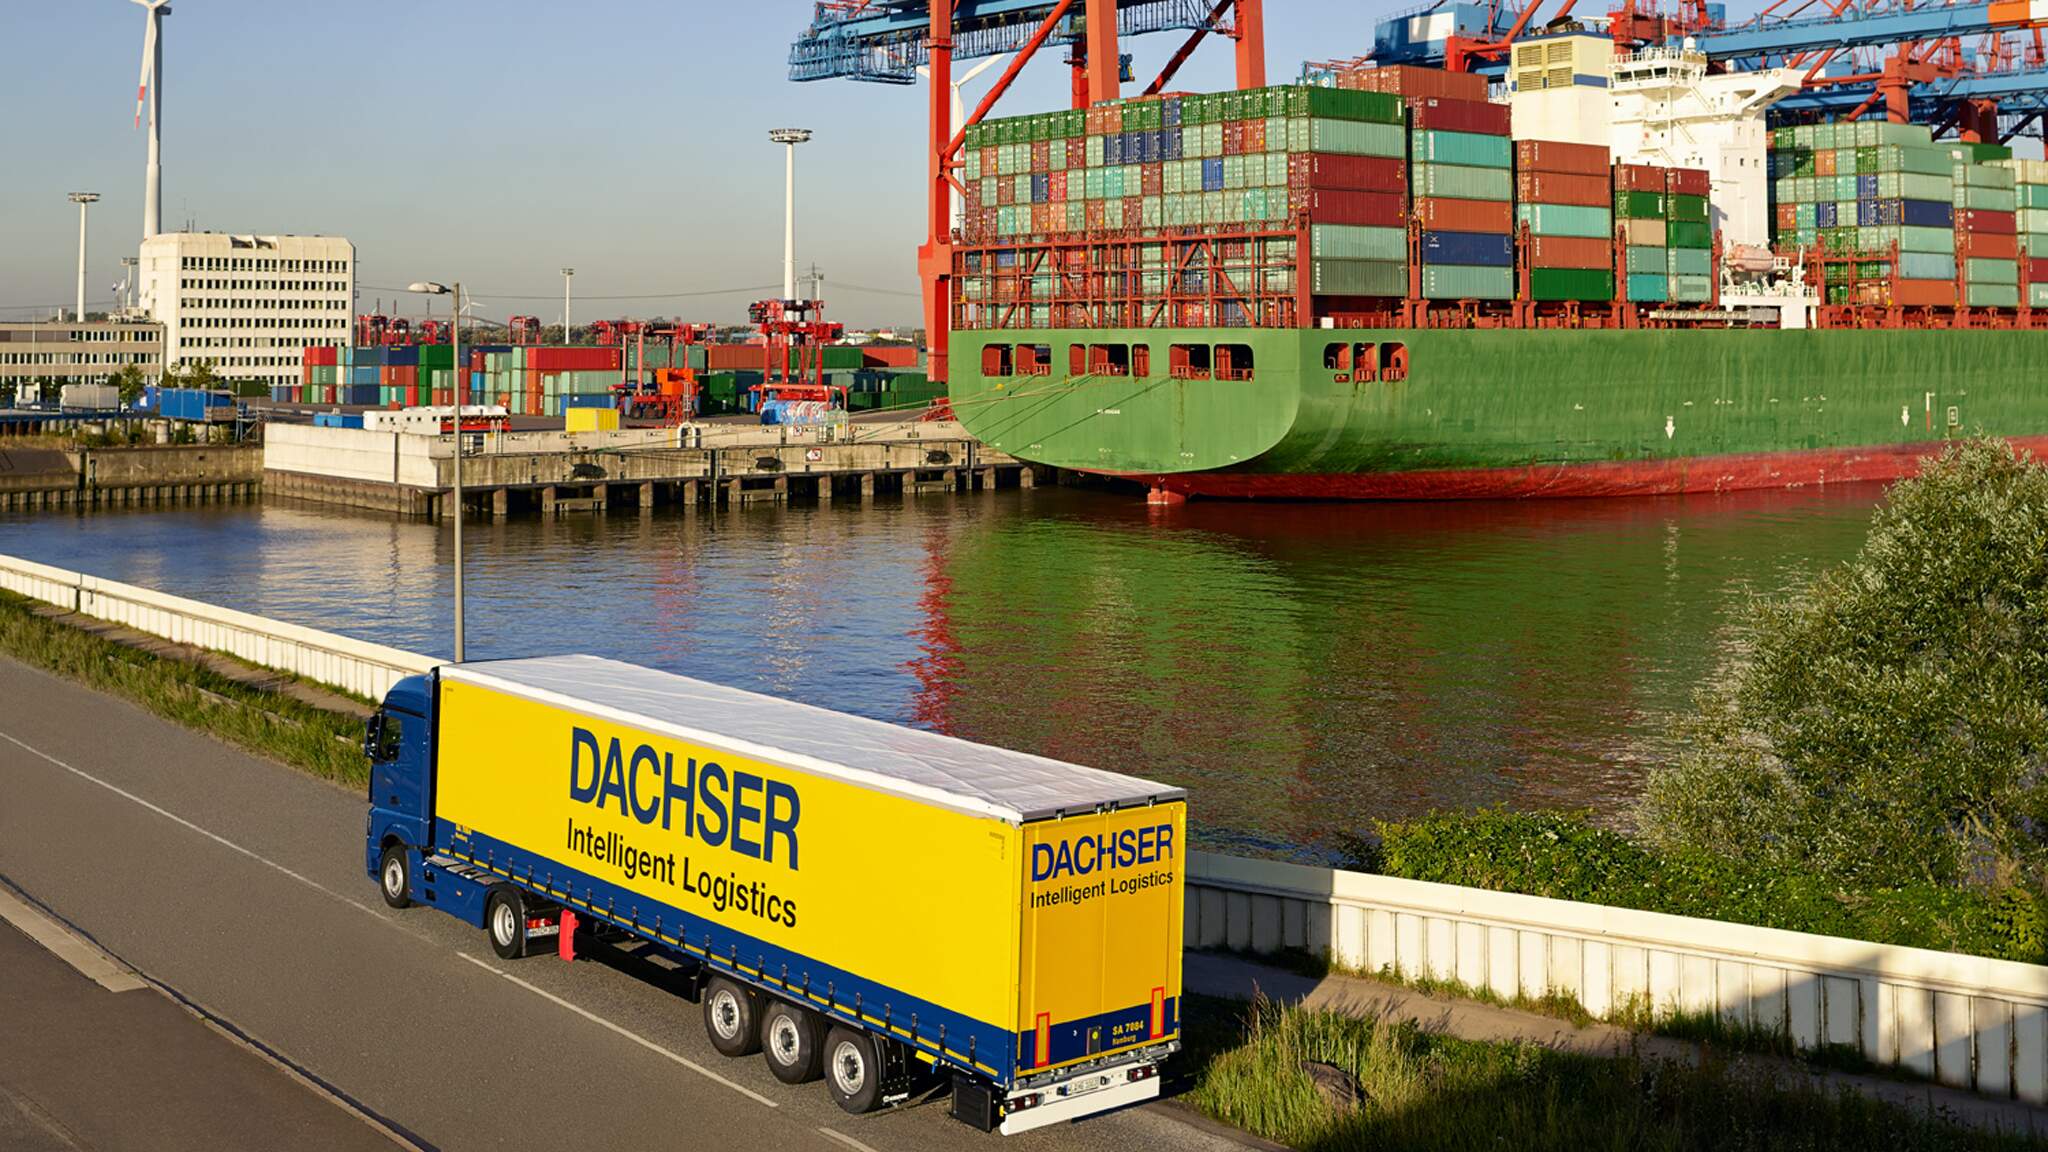 Managing idle times in transit terminals and notification processes efficiently relies chiefly on large logistics networks such as those operated by DACHSER.